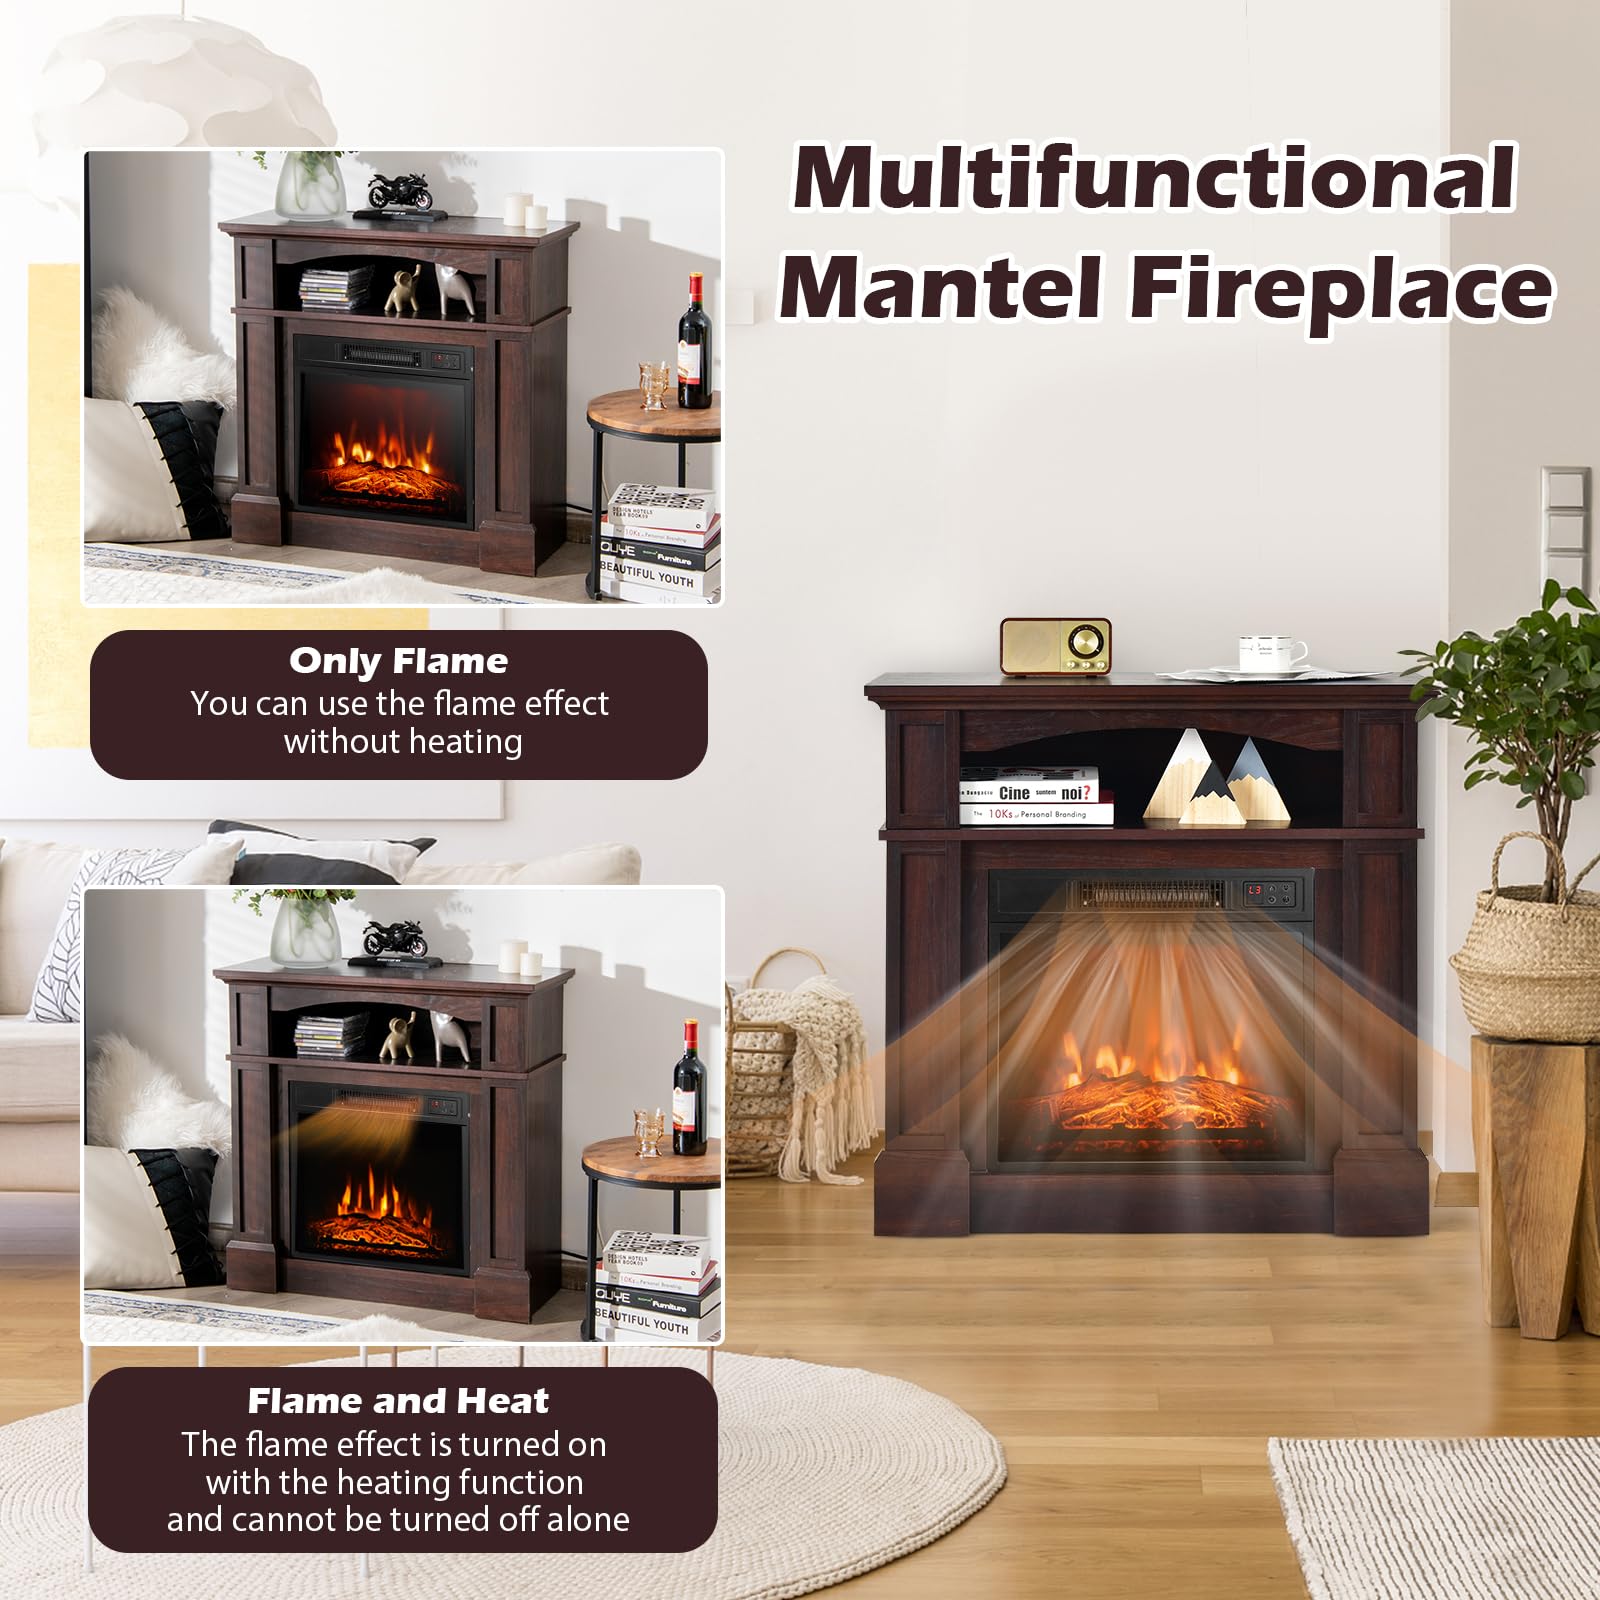 LDAILY 32" Electric Fireplace with Mantel, Freestanding Wooden Surround with 1400 W Fireplace Insert, 3D Realistic Flame, Remote Control, Overheating Safety System, Fireplace for Home RV, Brown